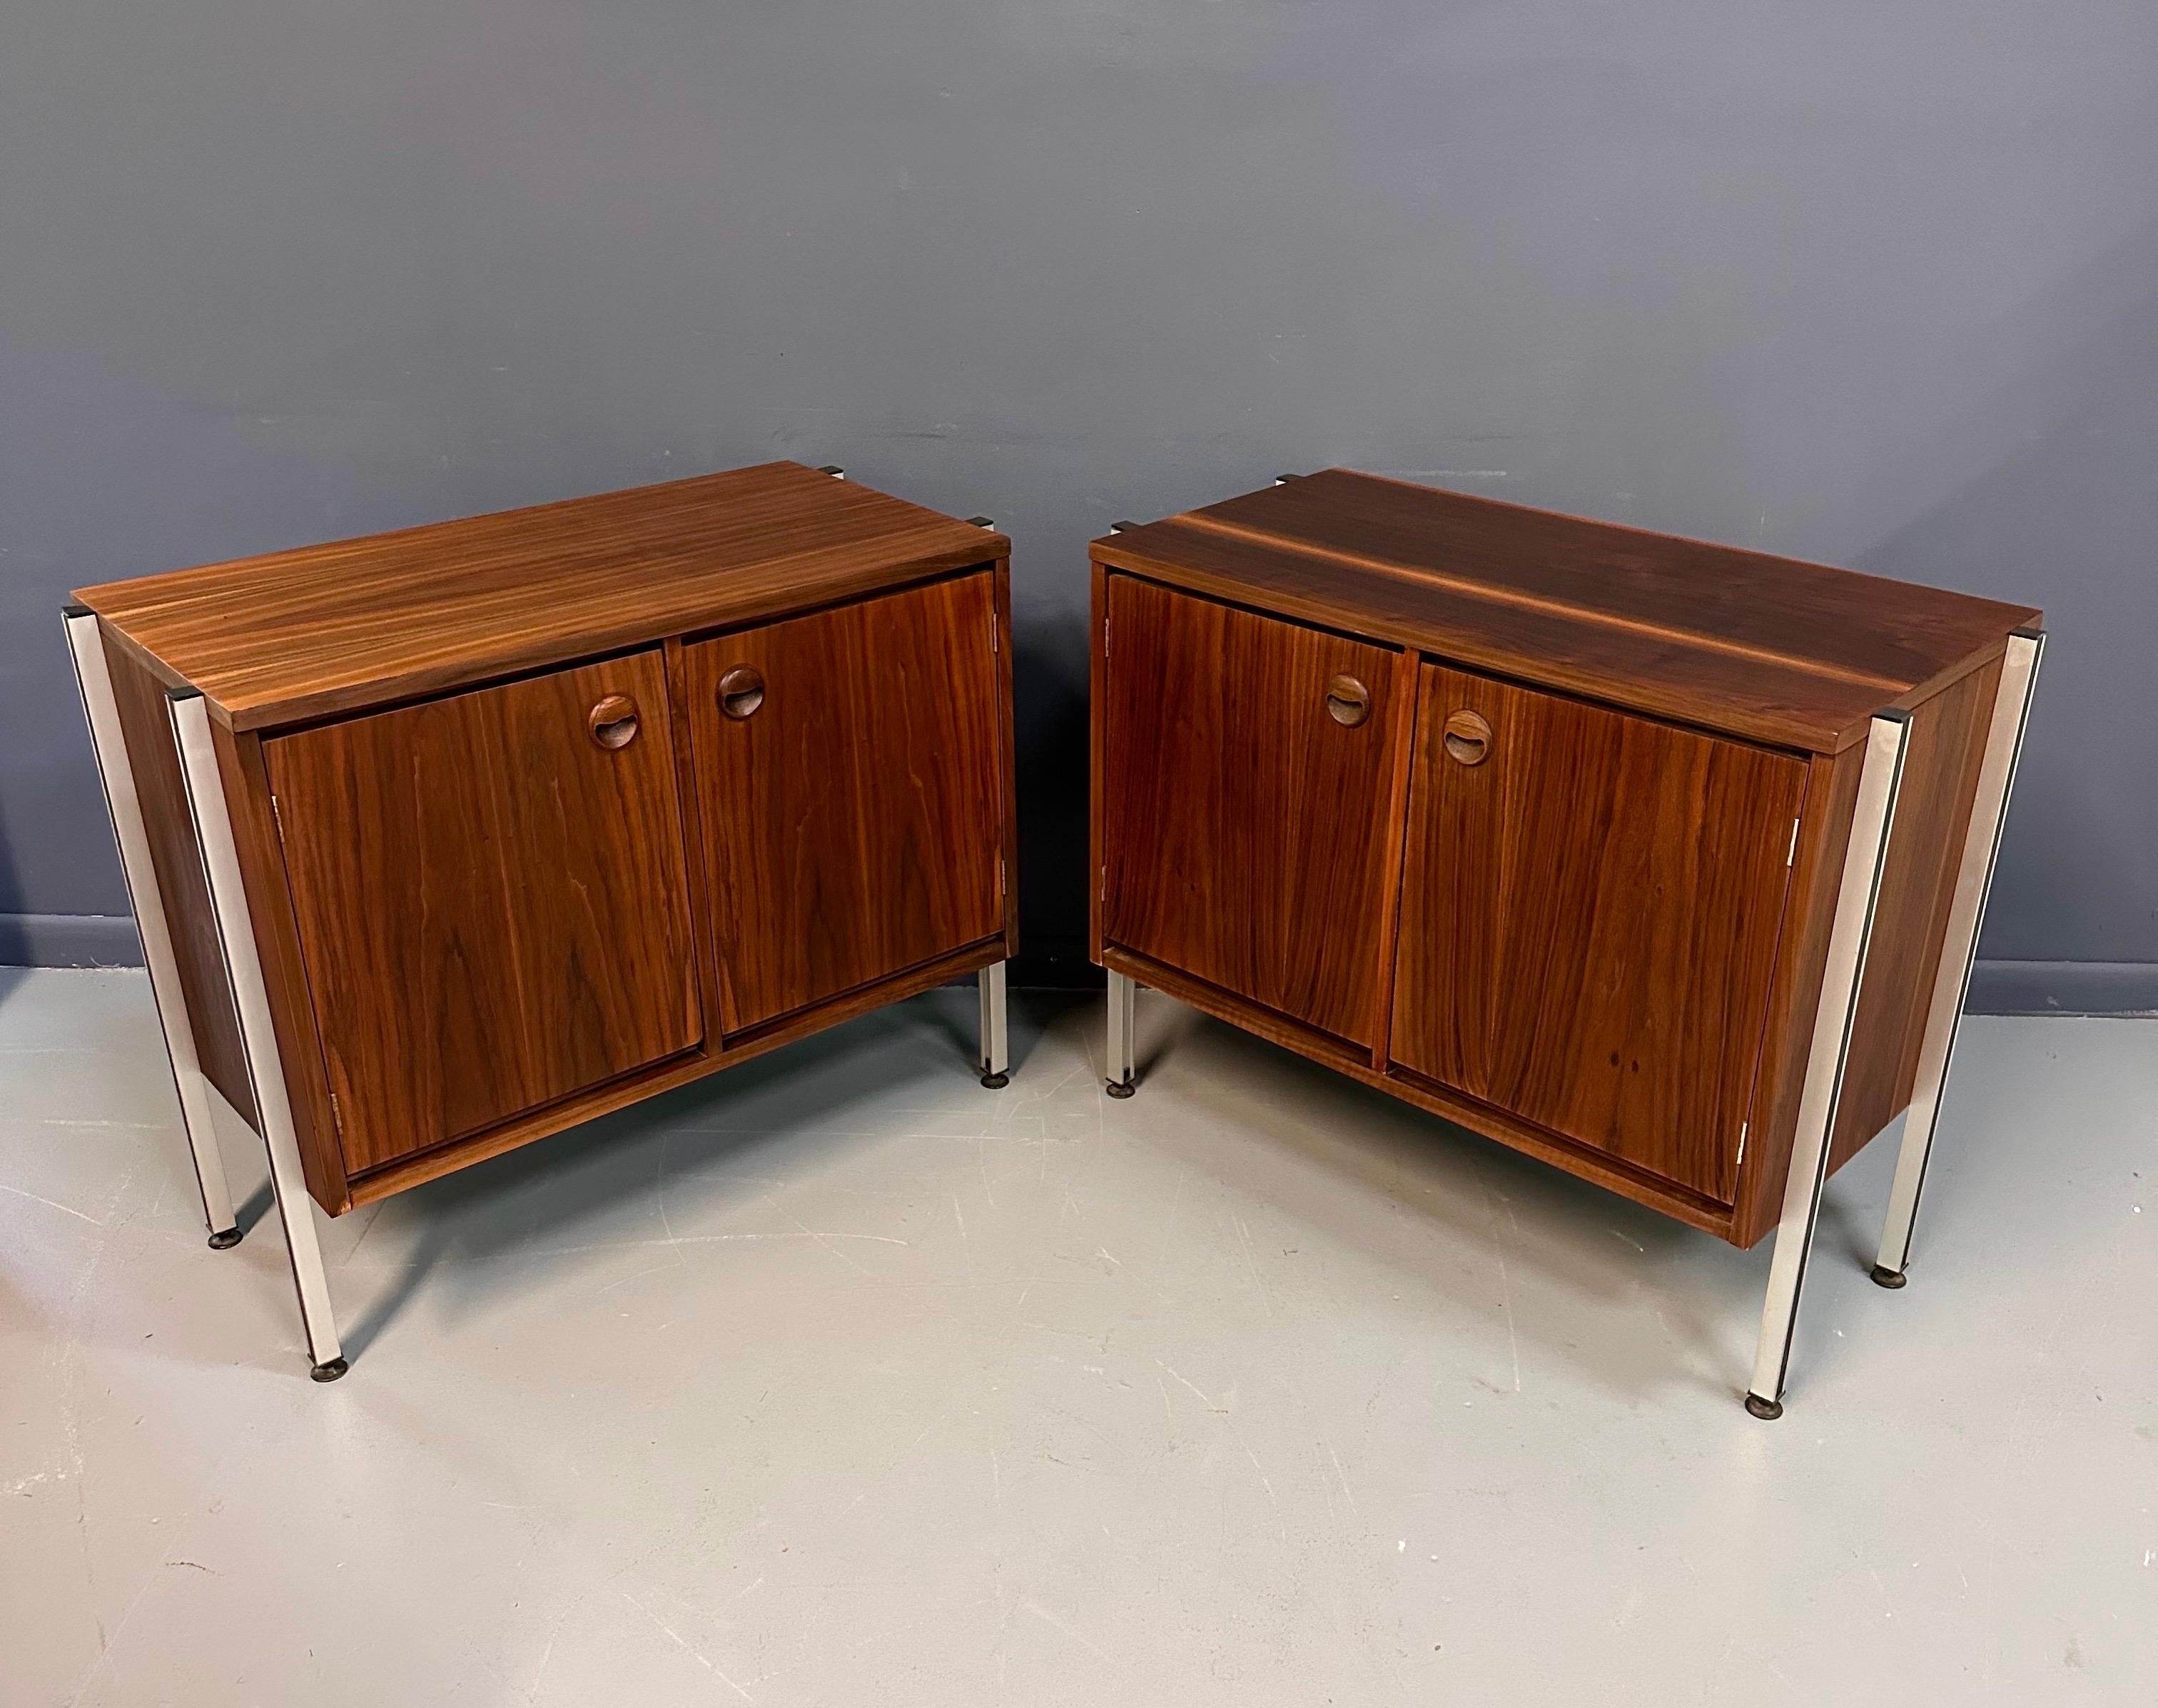 These two cabinets crafted out of extraordinary beautiful walnut each have two doors and a single shelf inside. The exterior legs have adjustable feet to level to any surface. So good looking these pieces were probably sold in an office environment